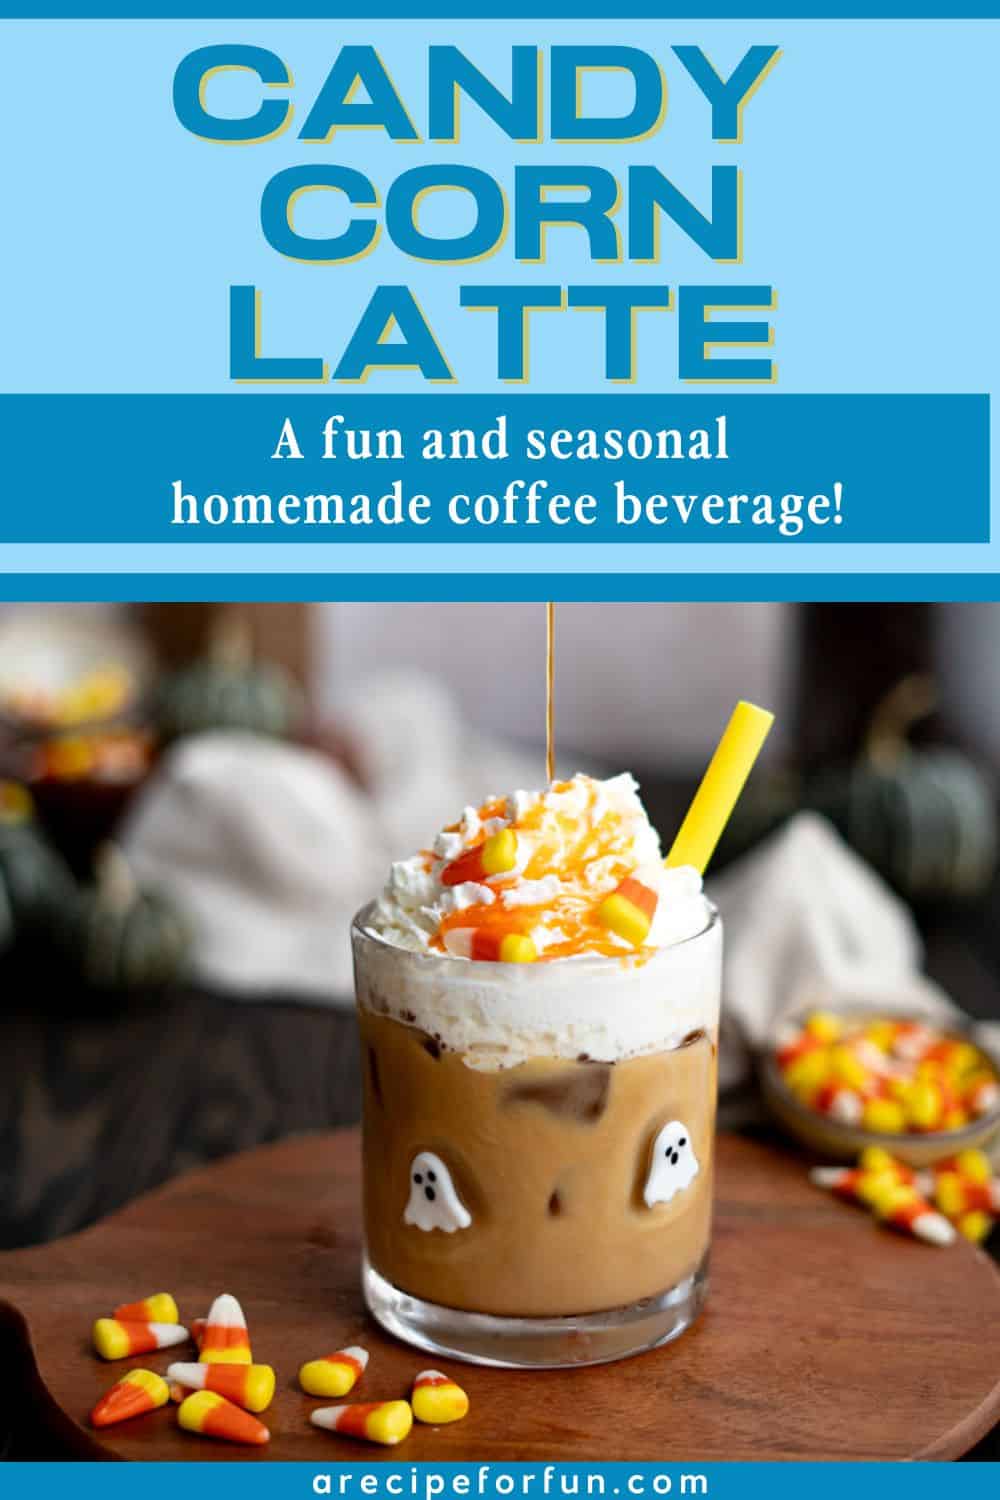 Pinterest Pin for a post about a recipe for a candy corn latte.